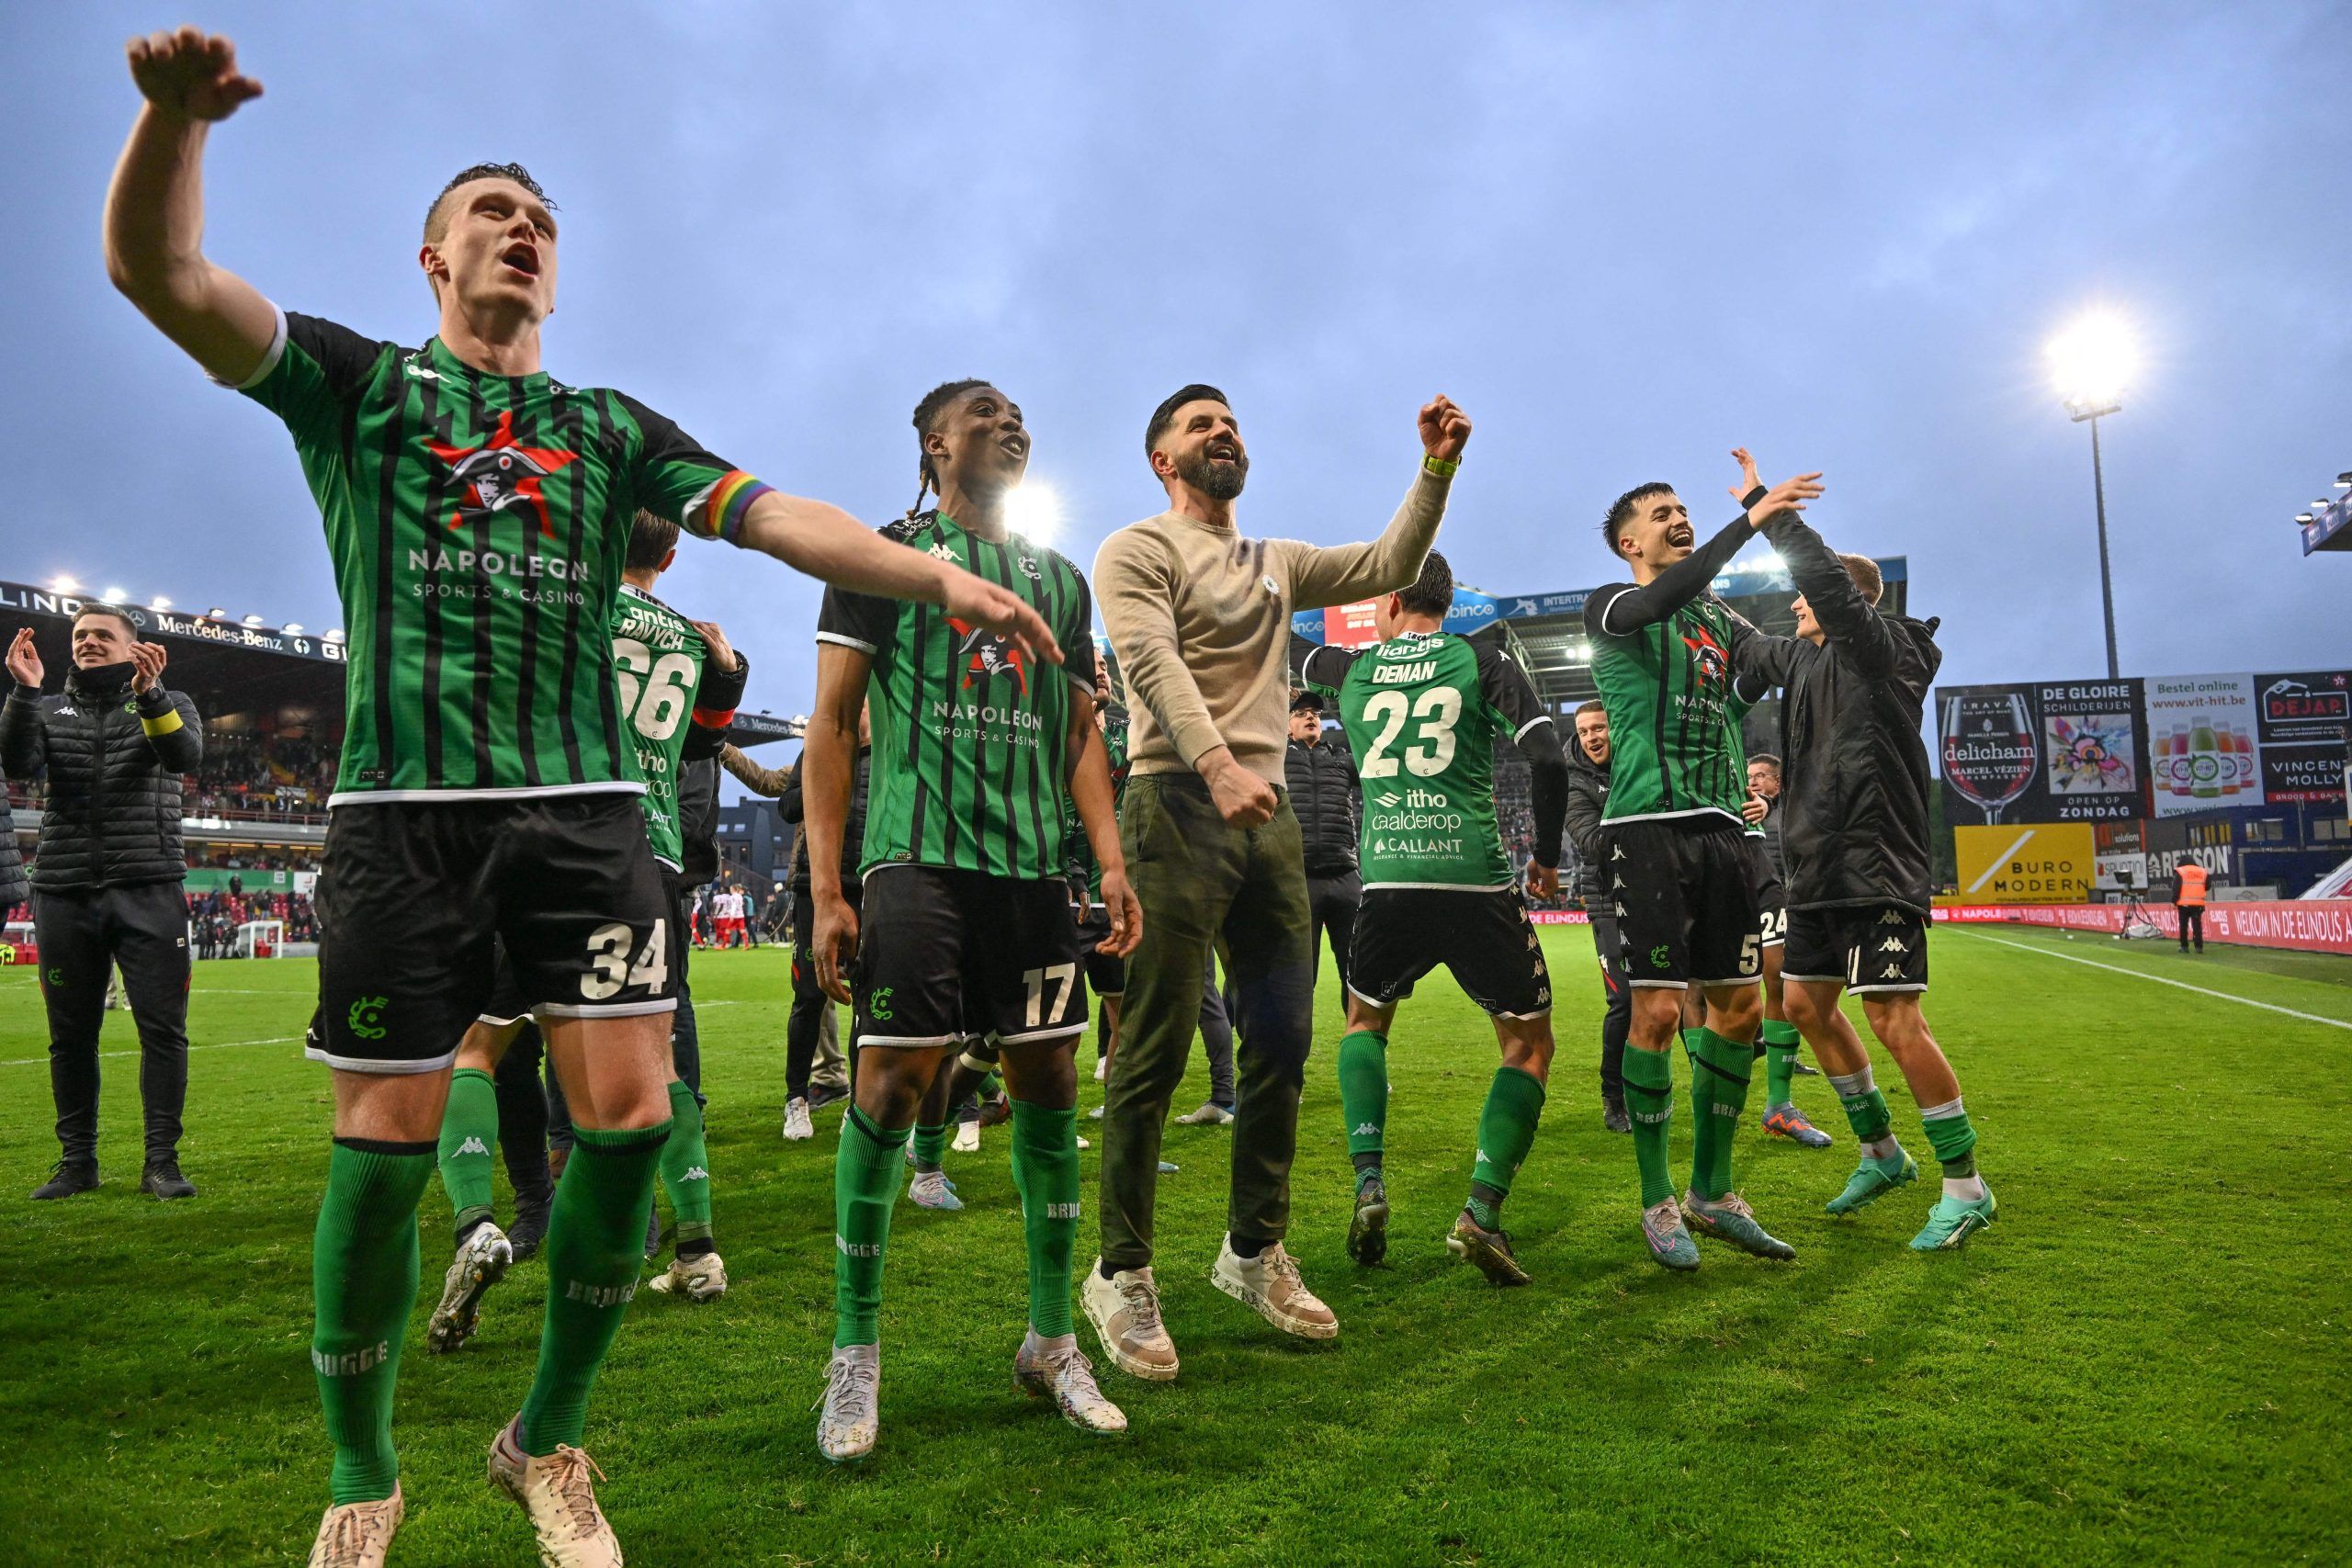 Cercle Brugge come full circle with best league finish in over a decade